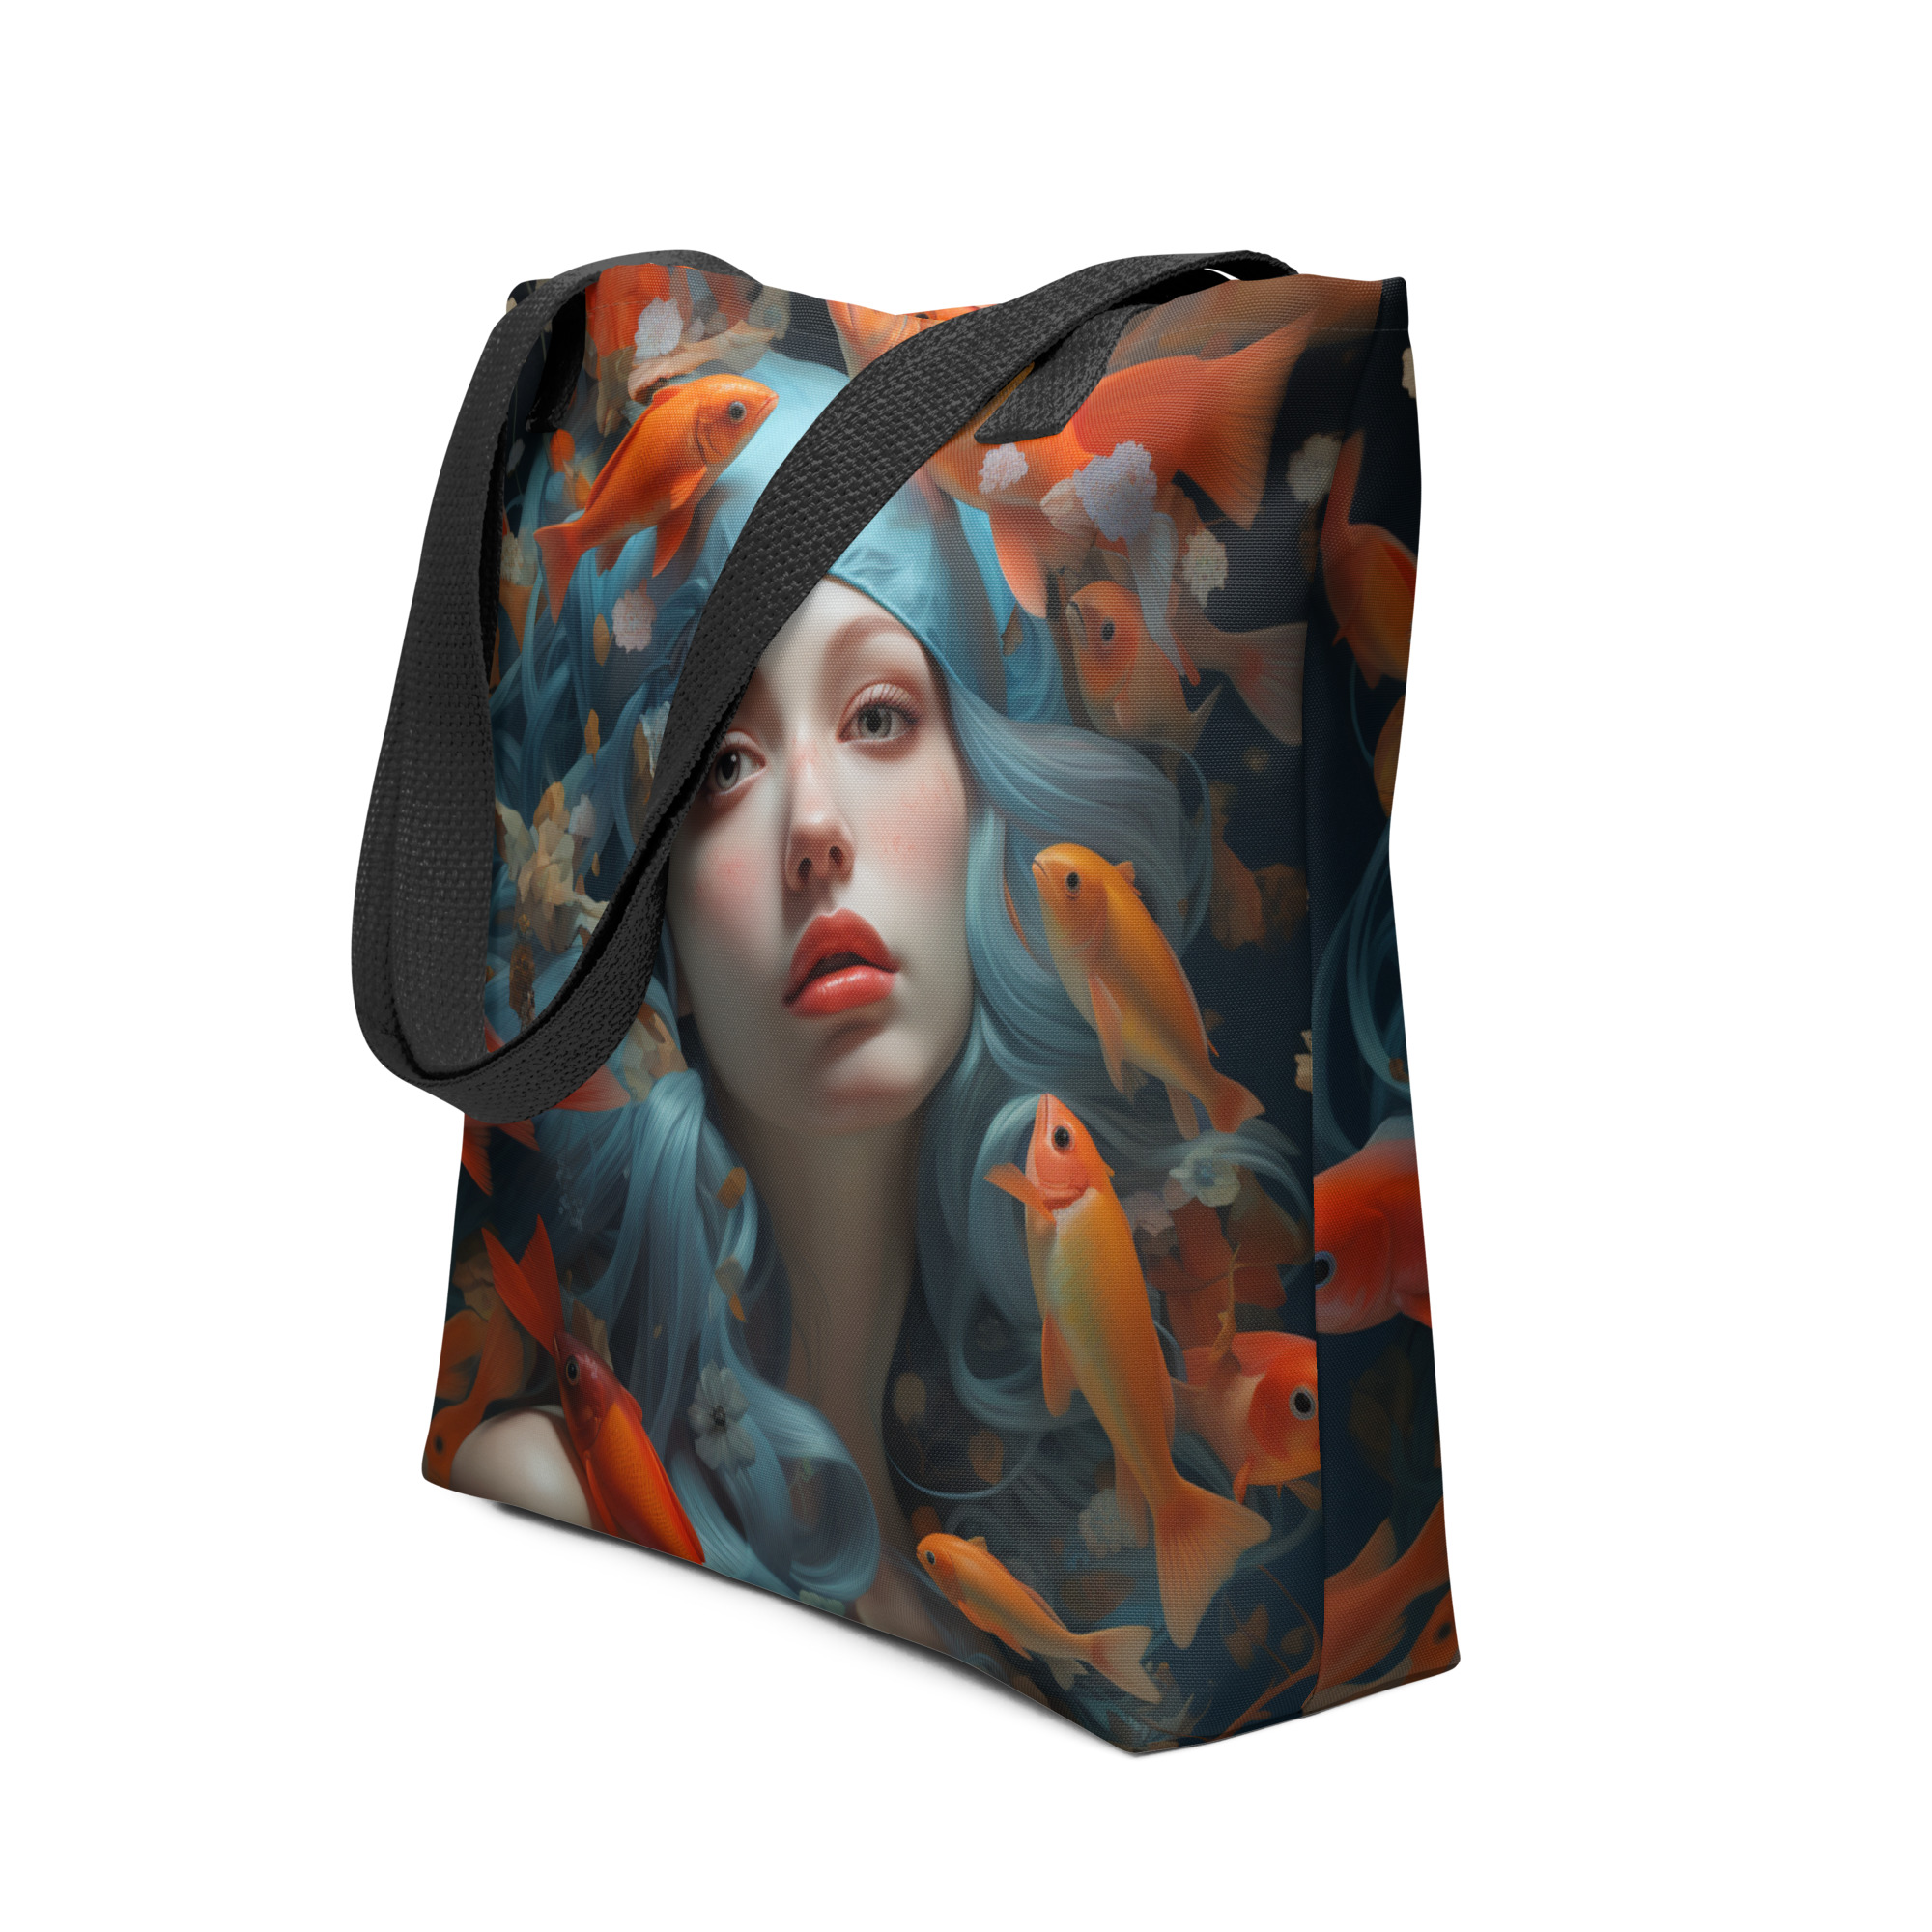 Mother Pisces by Dead Artists, Tote Bag, Zodiac Sign, Astrology